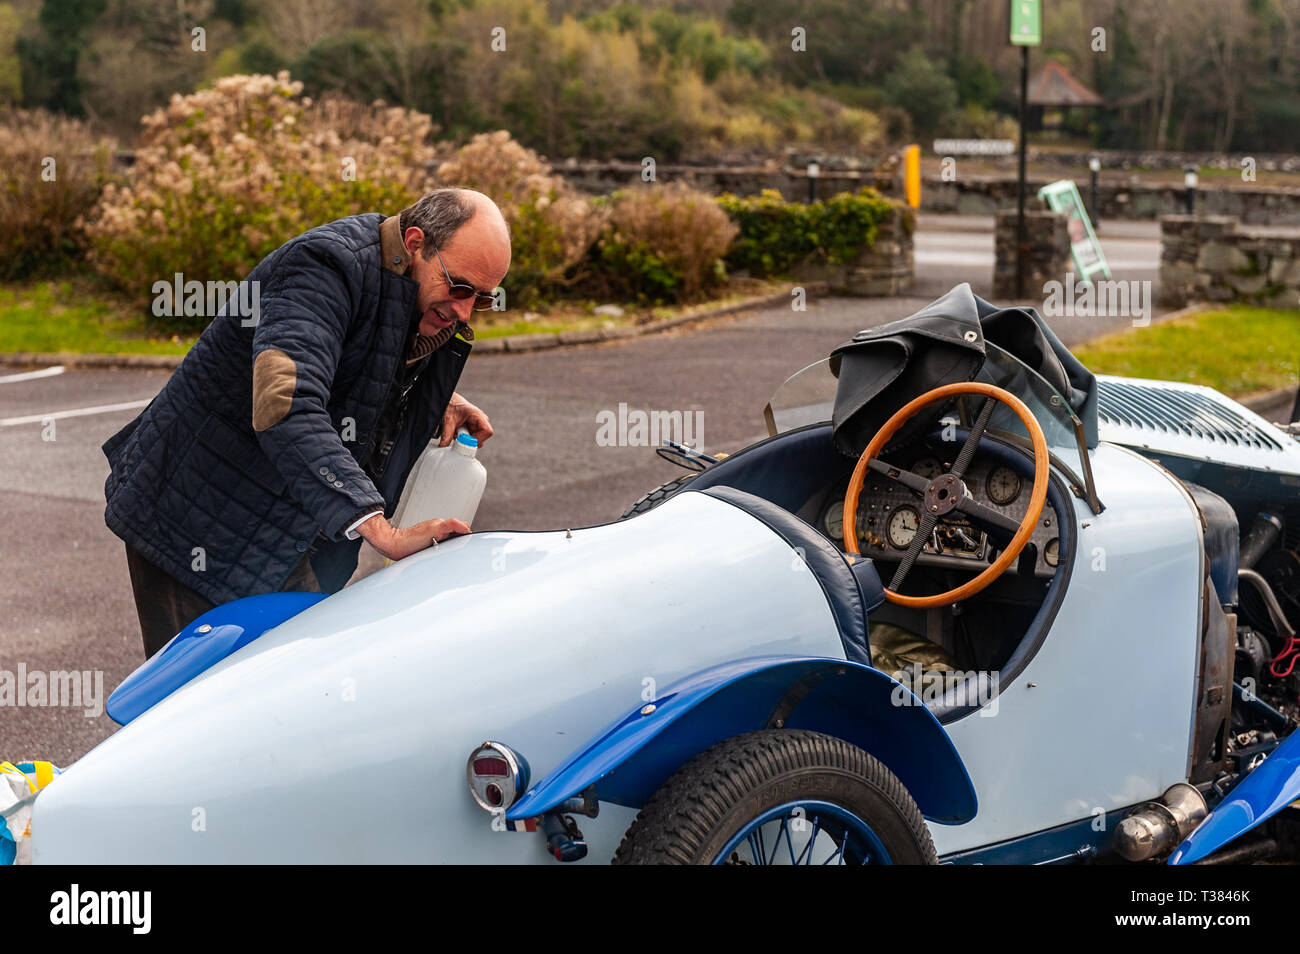 Glengarriff, West Cork, Ireland. 7th Apr, 2019. The French car club 'Amilcar' is currently on a 6 day tour of Ireland.  The club made a stop at the Eccles Hotel, Glengarriff this afternoon. Credit: Andy Gibson/Alamy Live News. Stock Photo